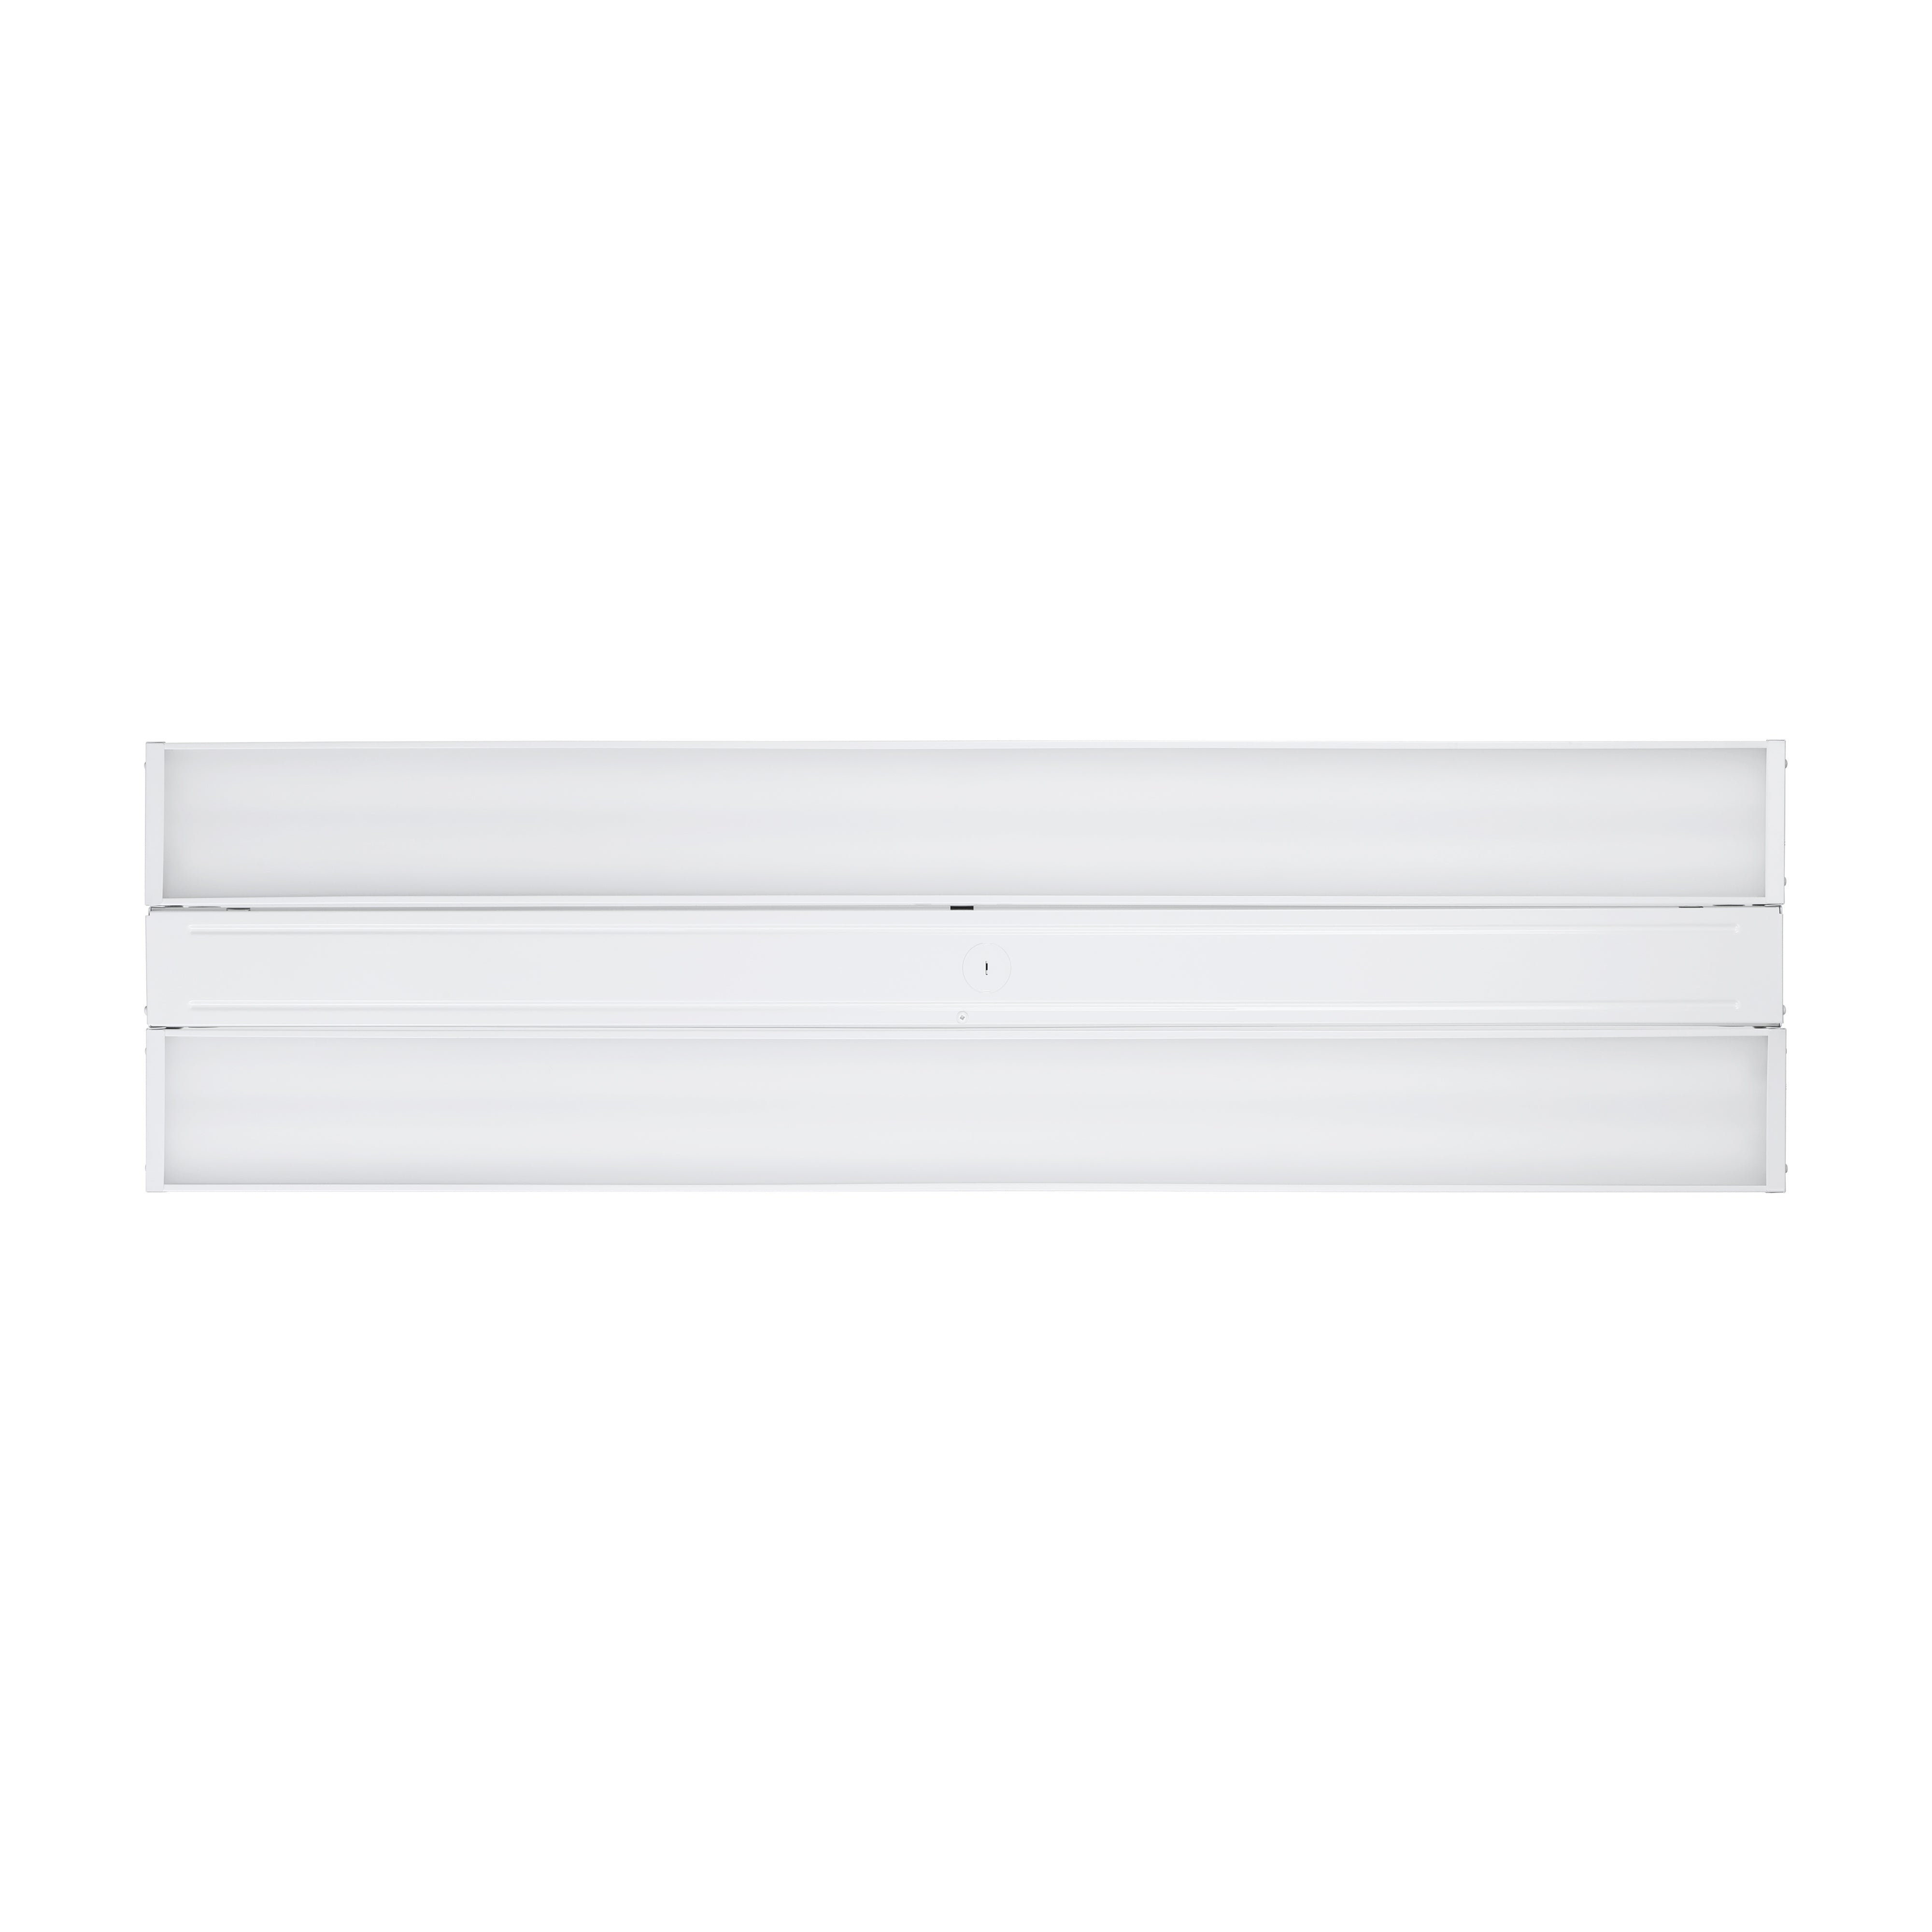 PowerWave Max 225W LED High Bay Linear Fixtures